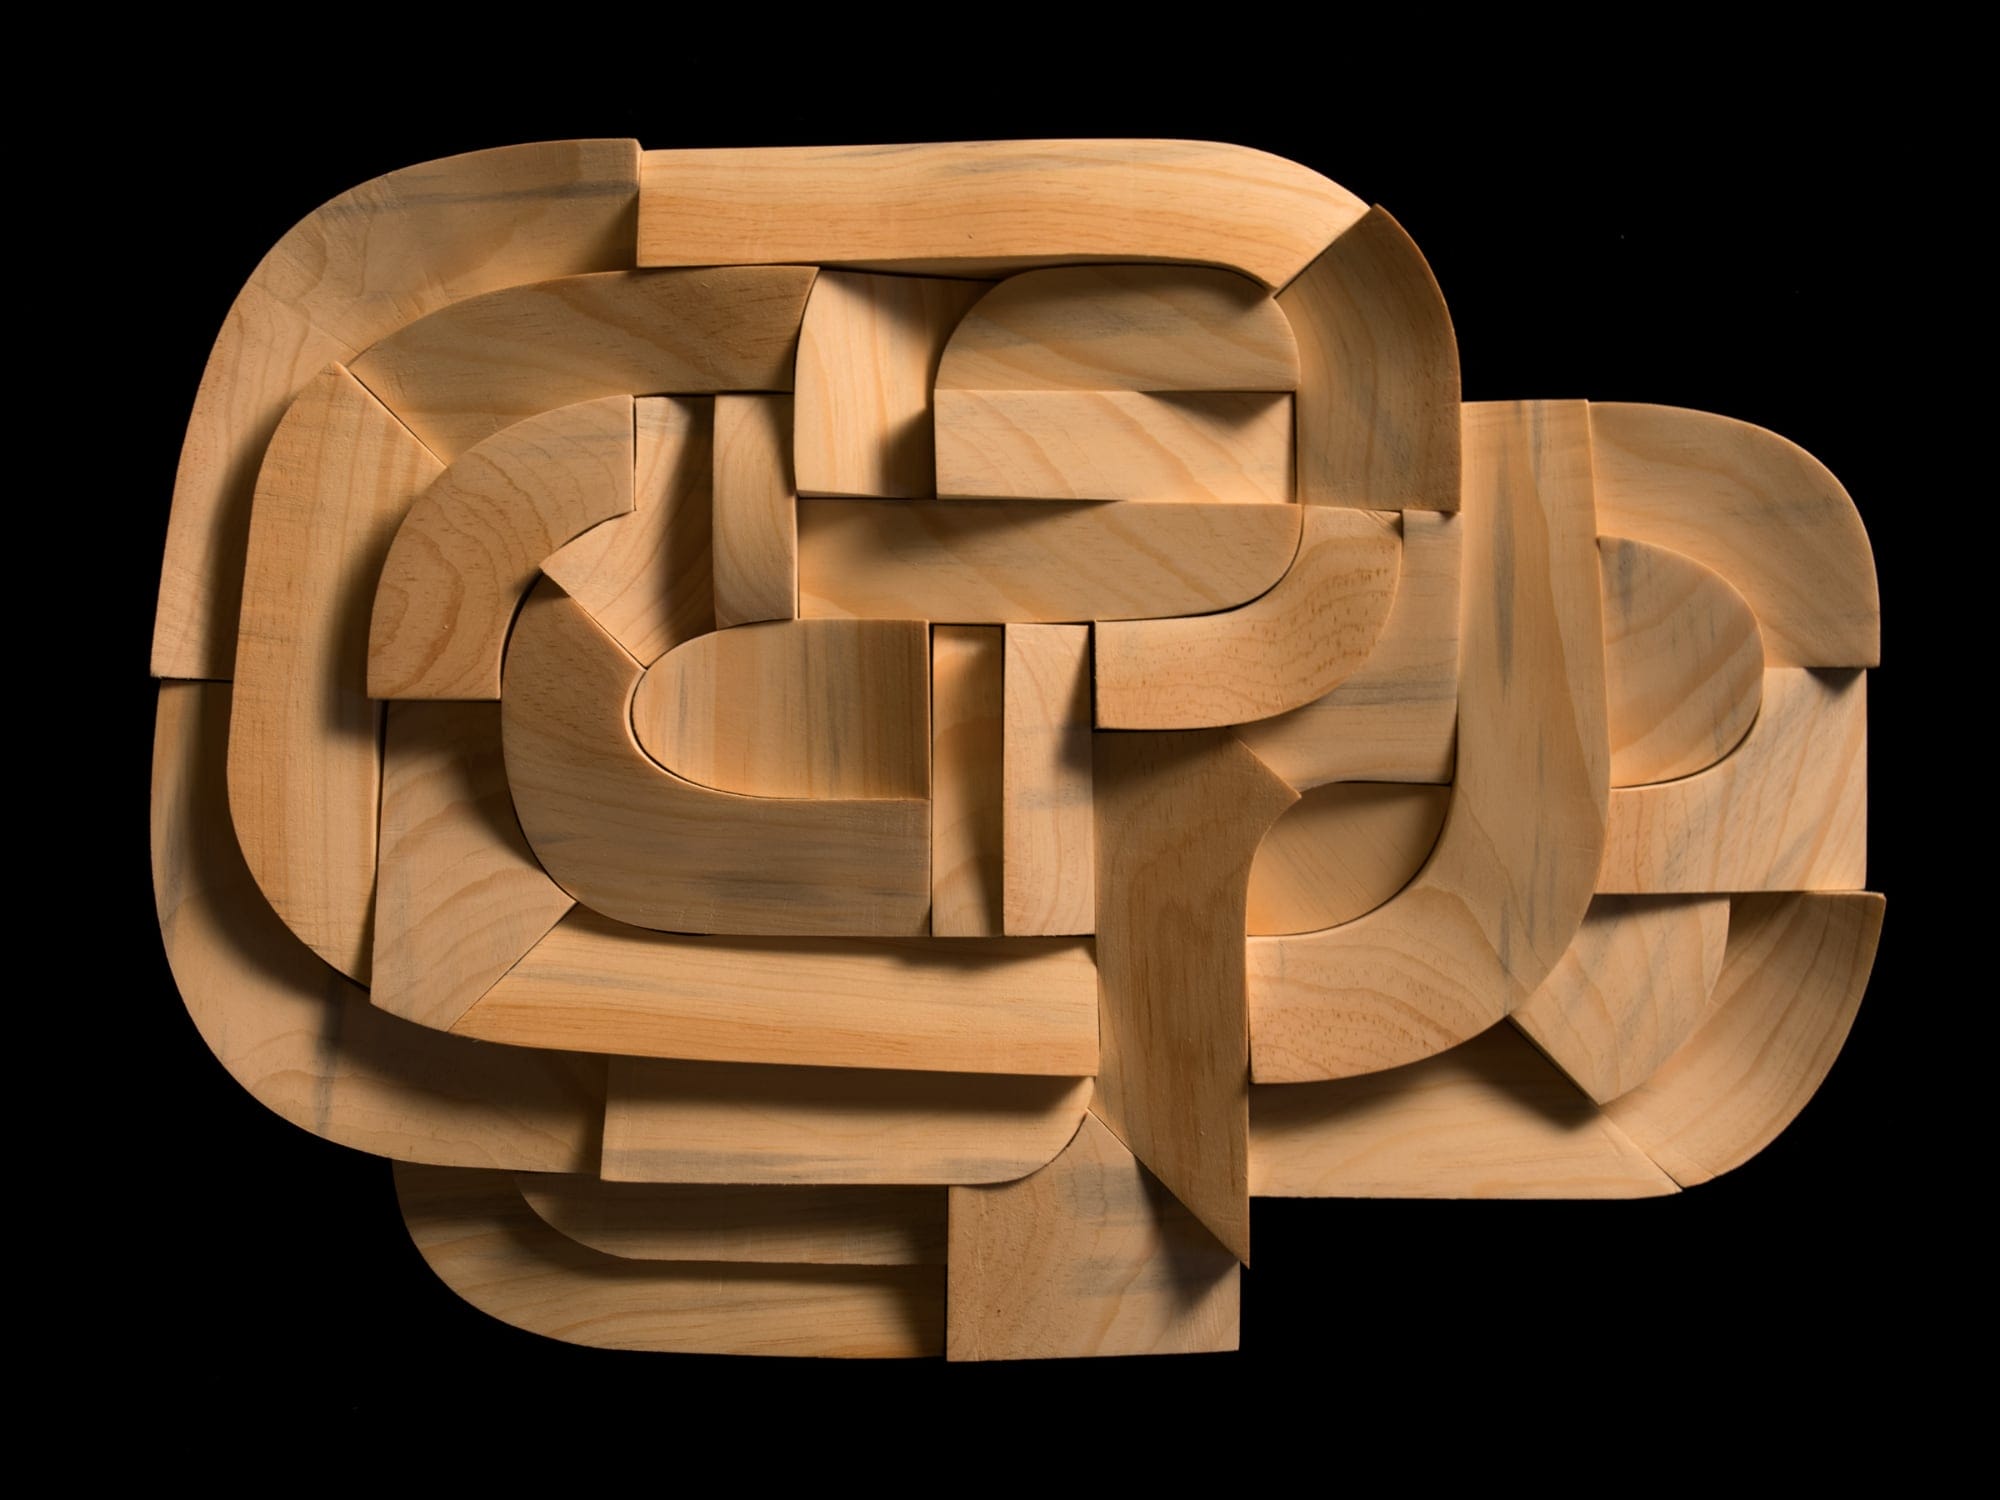 an oval wooden sculpture with fragmented pieces on various levels against a black backdrop